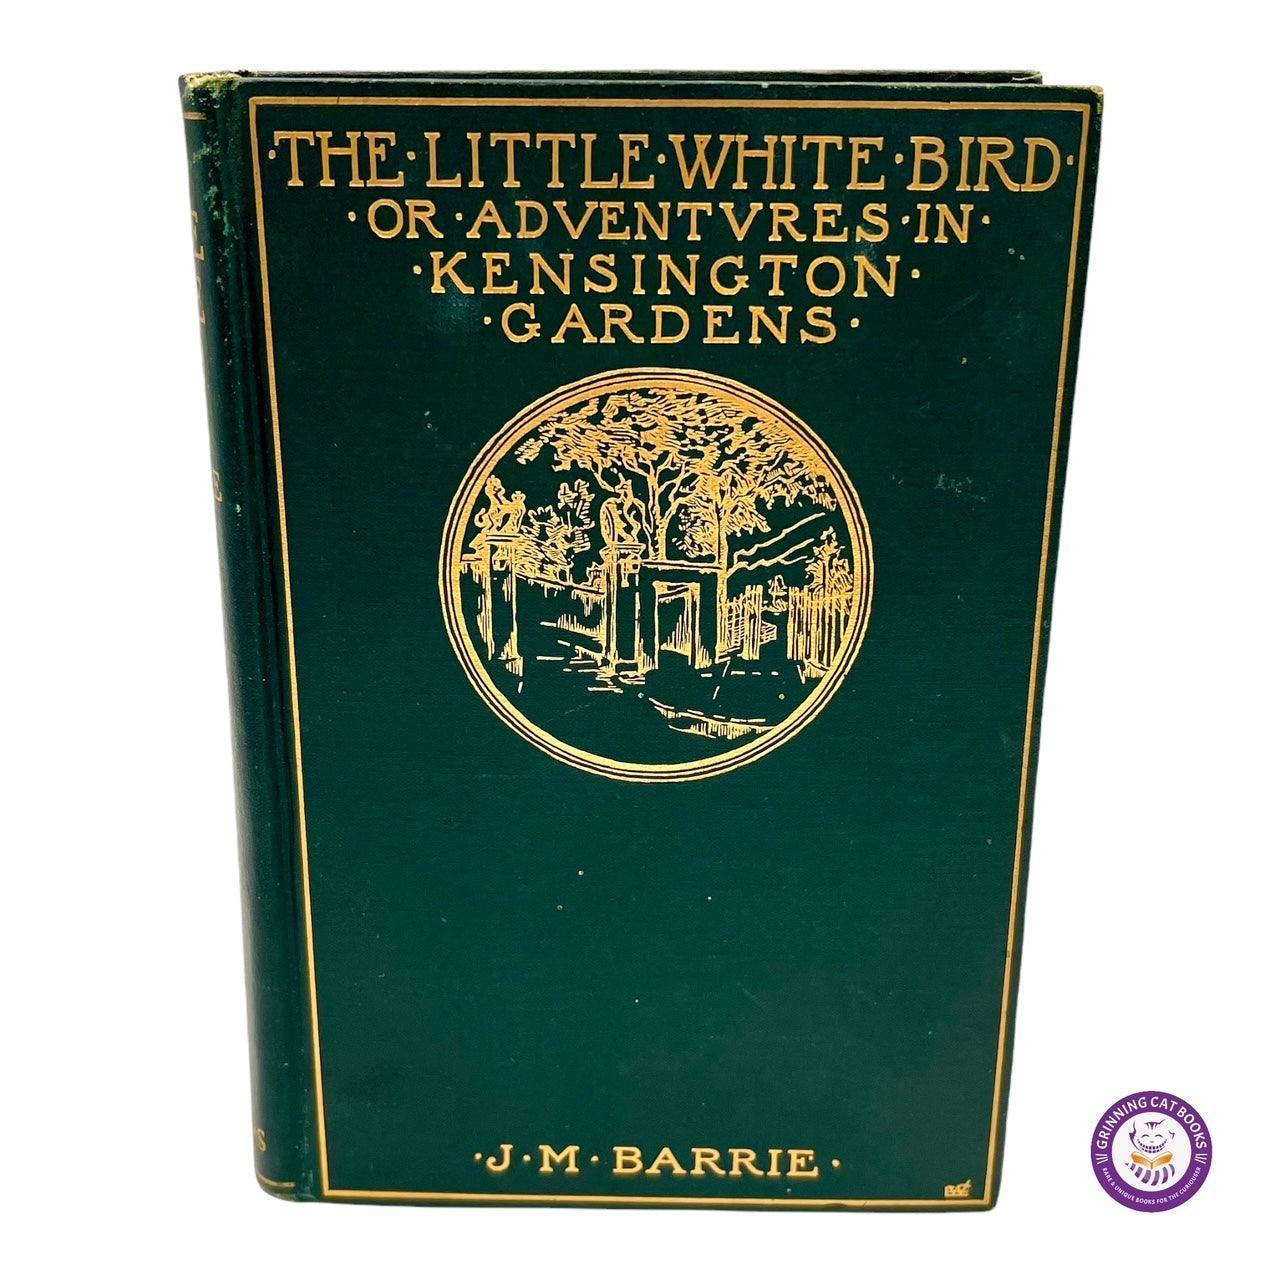 The Little White Bird or Adventures in Kensington Gardens (very first appearance of Peter Pan) - Grinning Cat Books - - CHILDRENS LITERATURE, ENGLISH LITERATURE, PETER PAN